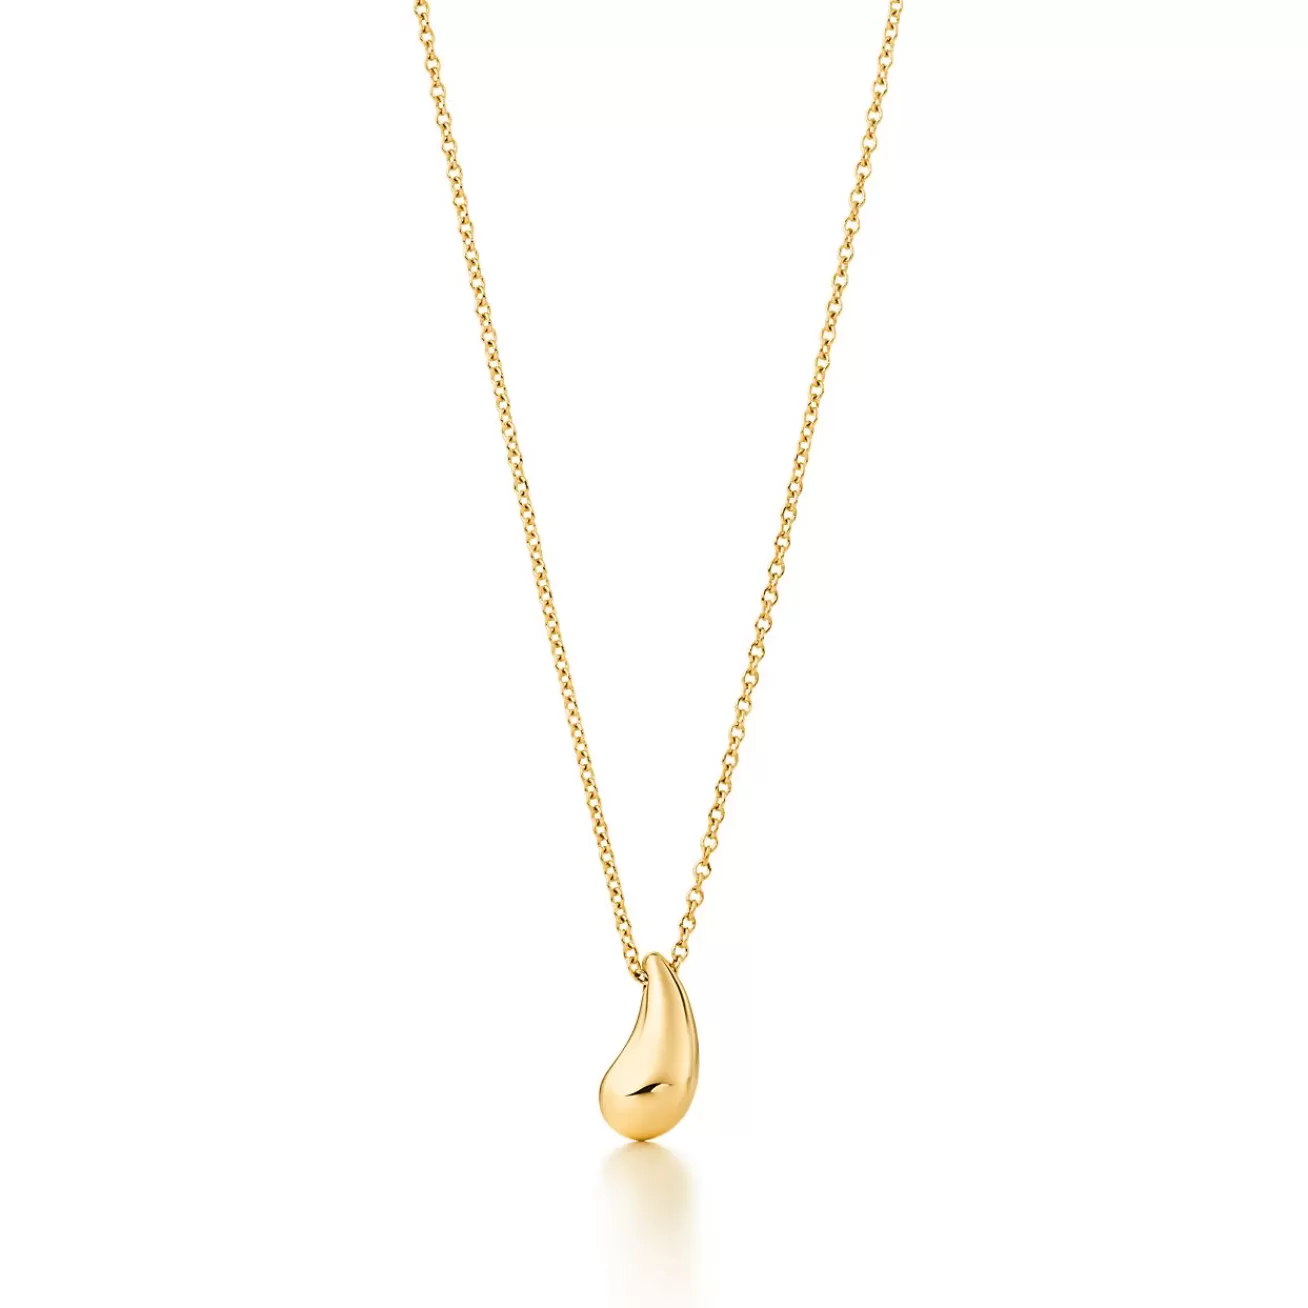 Tiffany & Co. Elsa Peretti® Teardrop pendant in 18k gold. | ^ Necklaces & Pendants | Gifts for Her